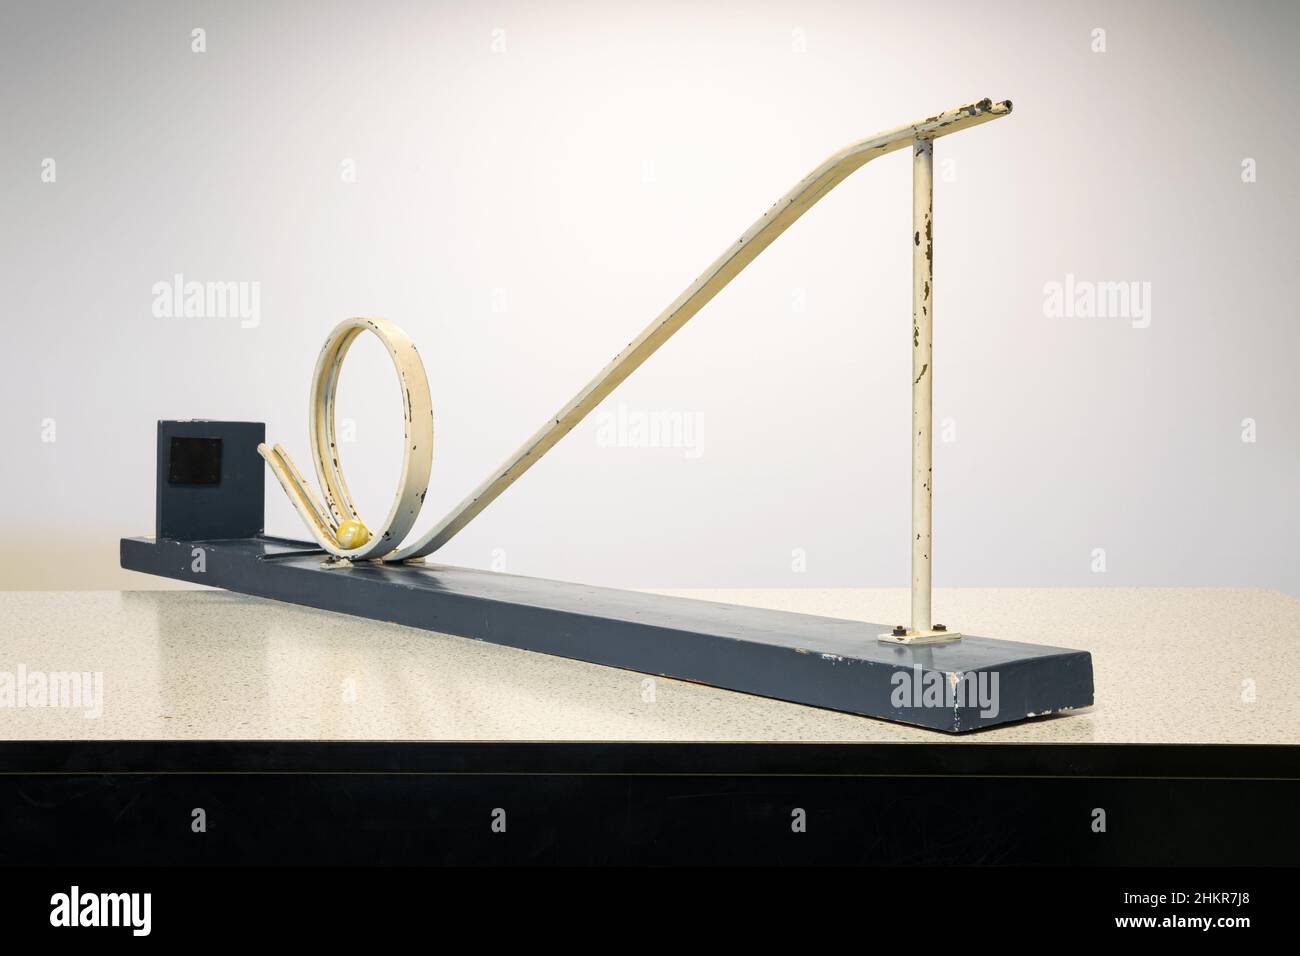 Marble run with looping. Used in physics class to show the law of conservation of energy. Stock Photo